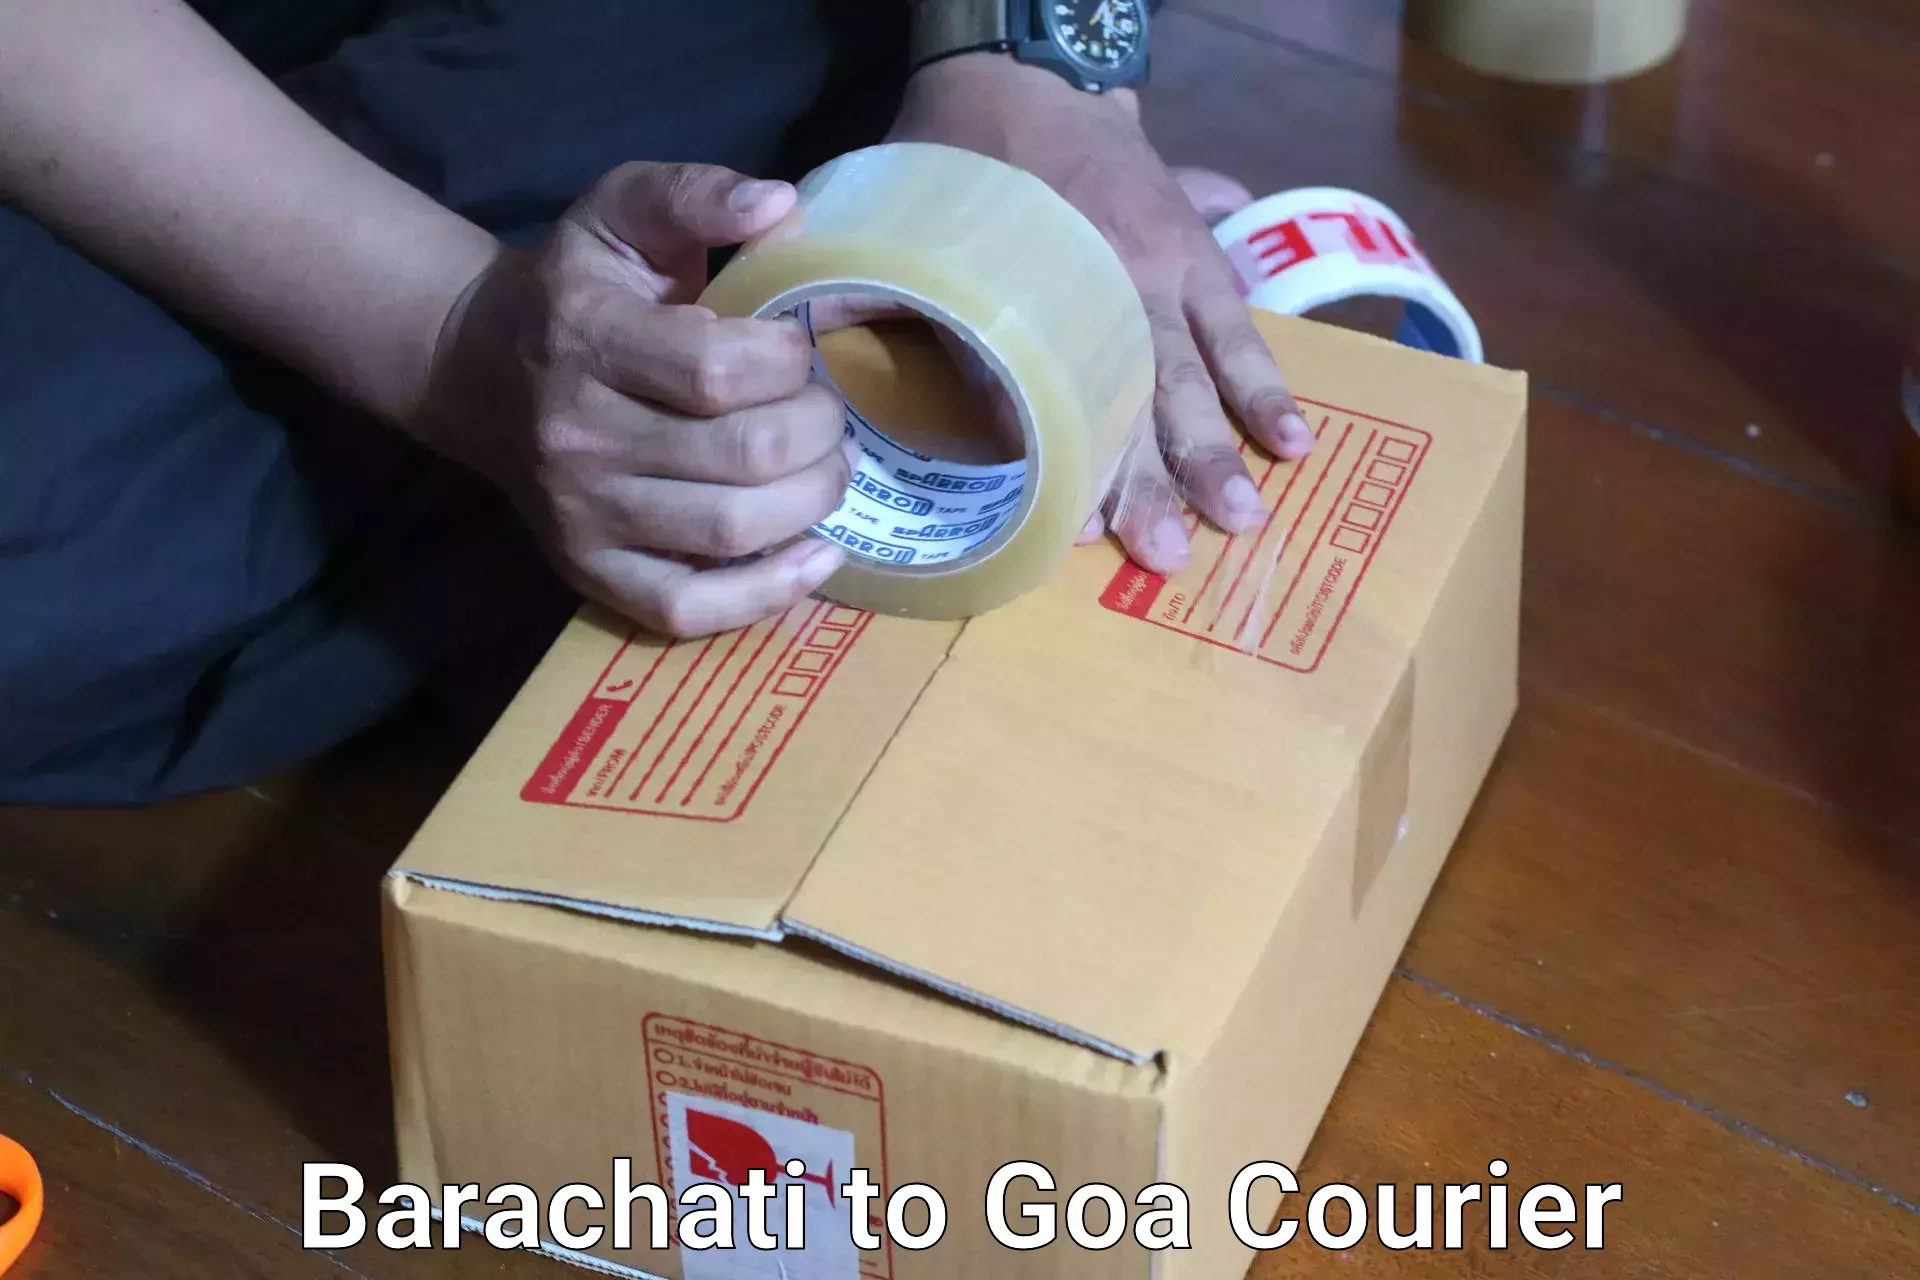 Luggage delivery system Barachati to Goa